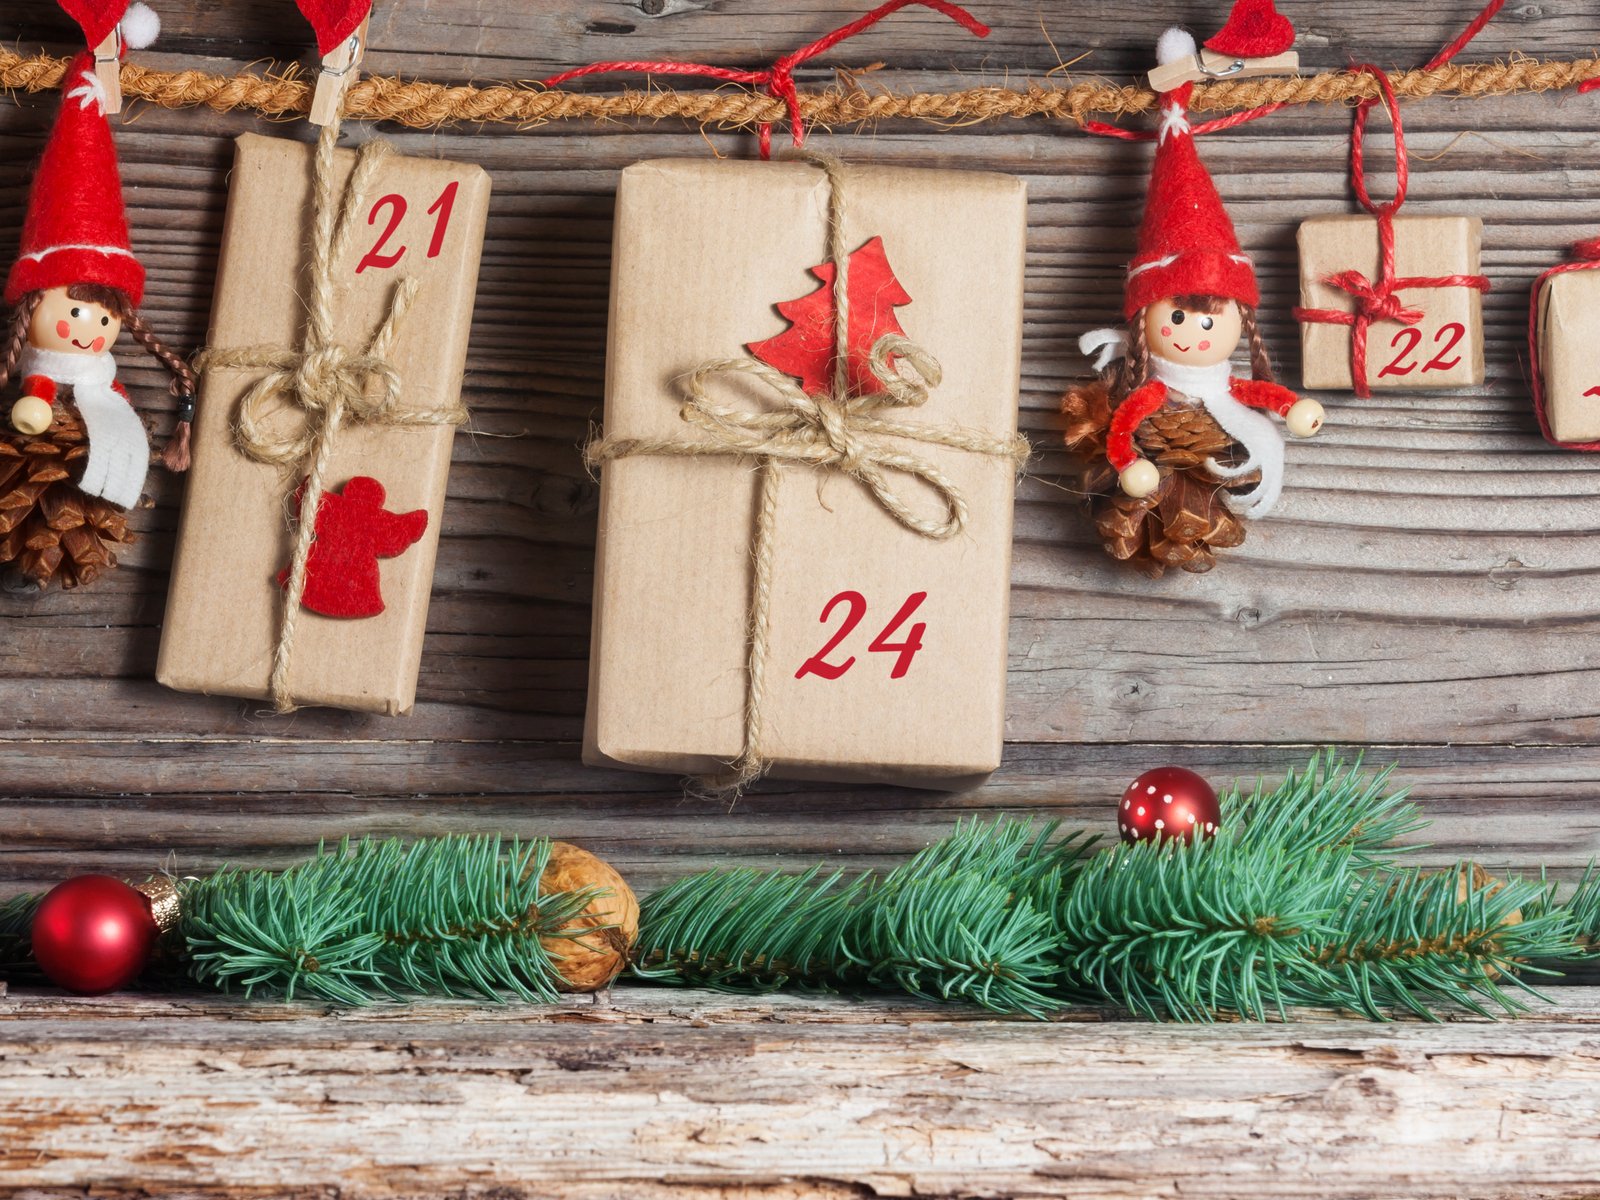 Our boozy advent calendars will get you in the holiday spirit